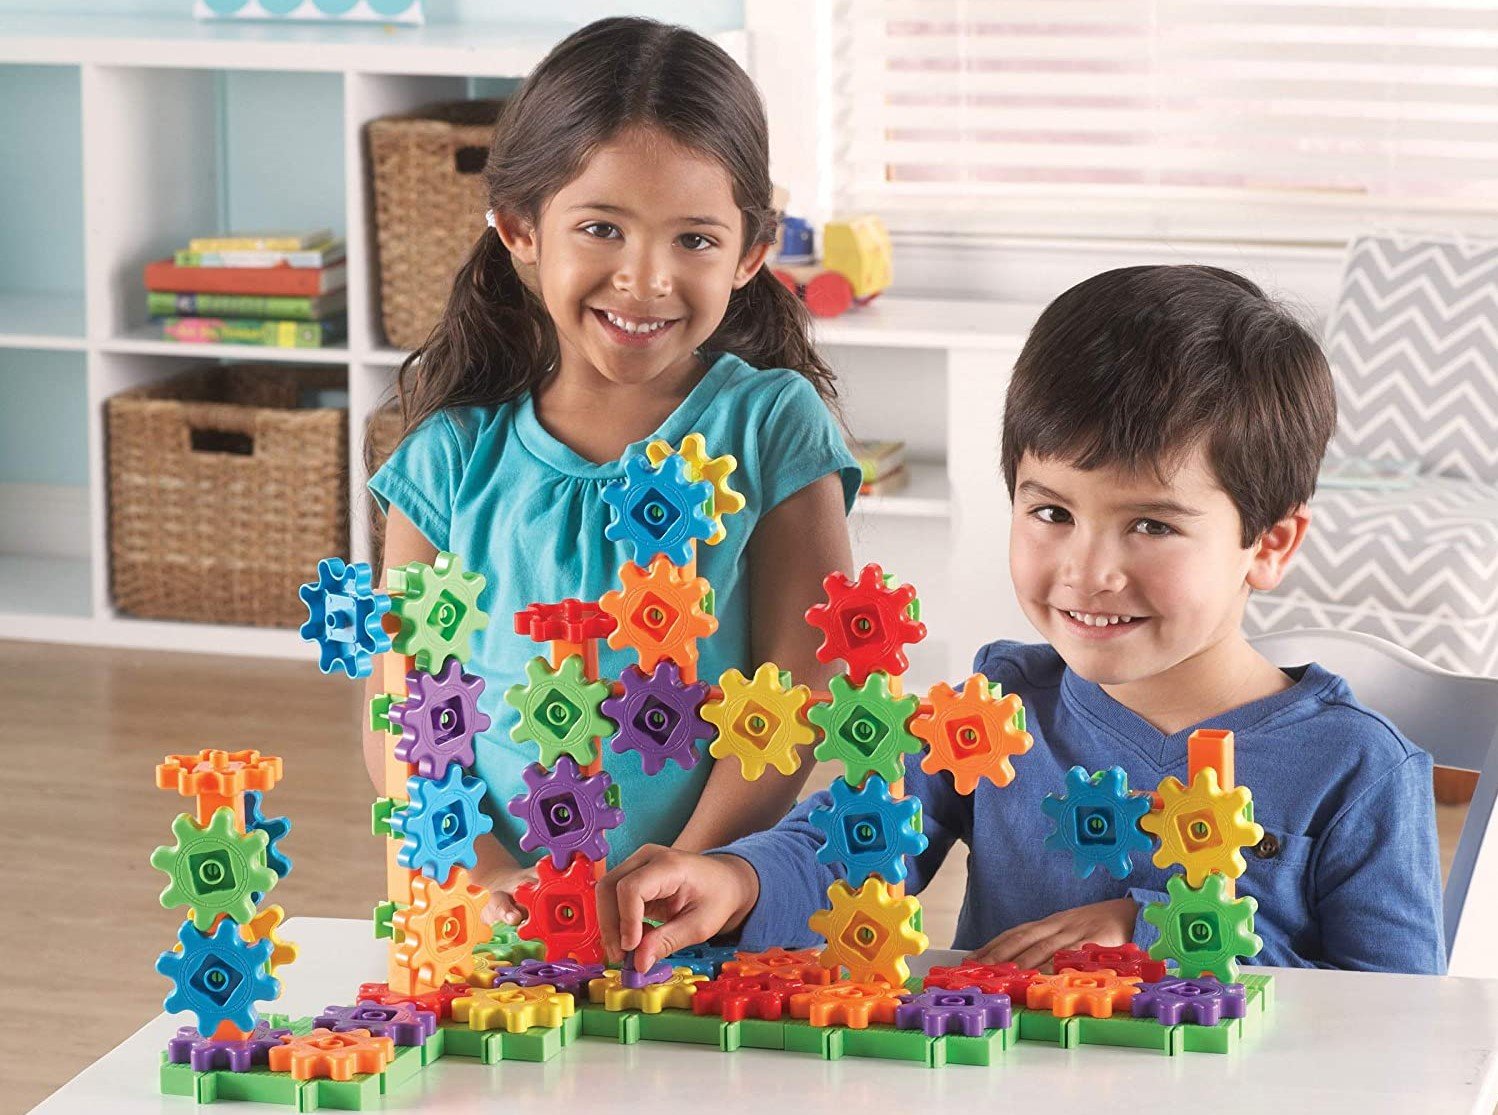 activity toys for 5 year old